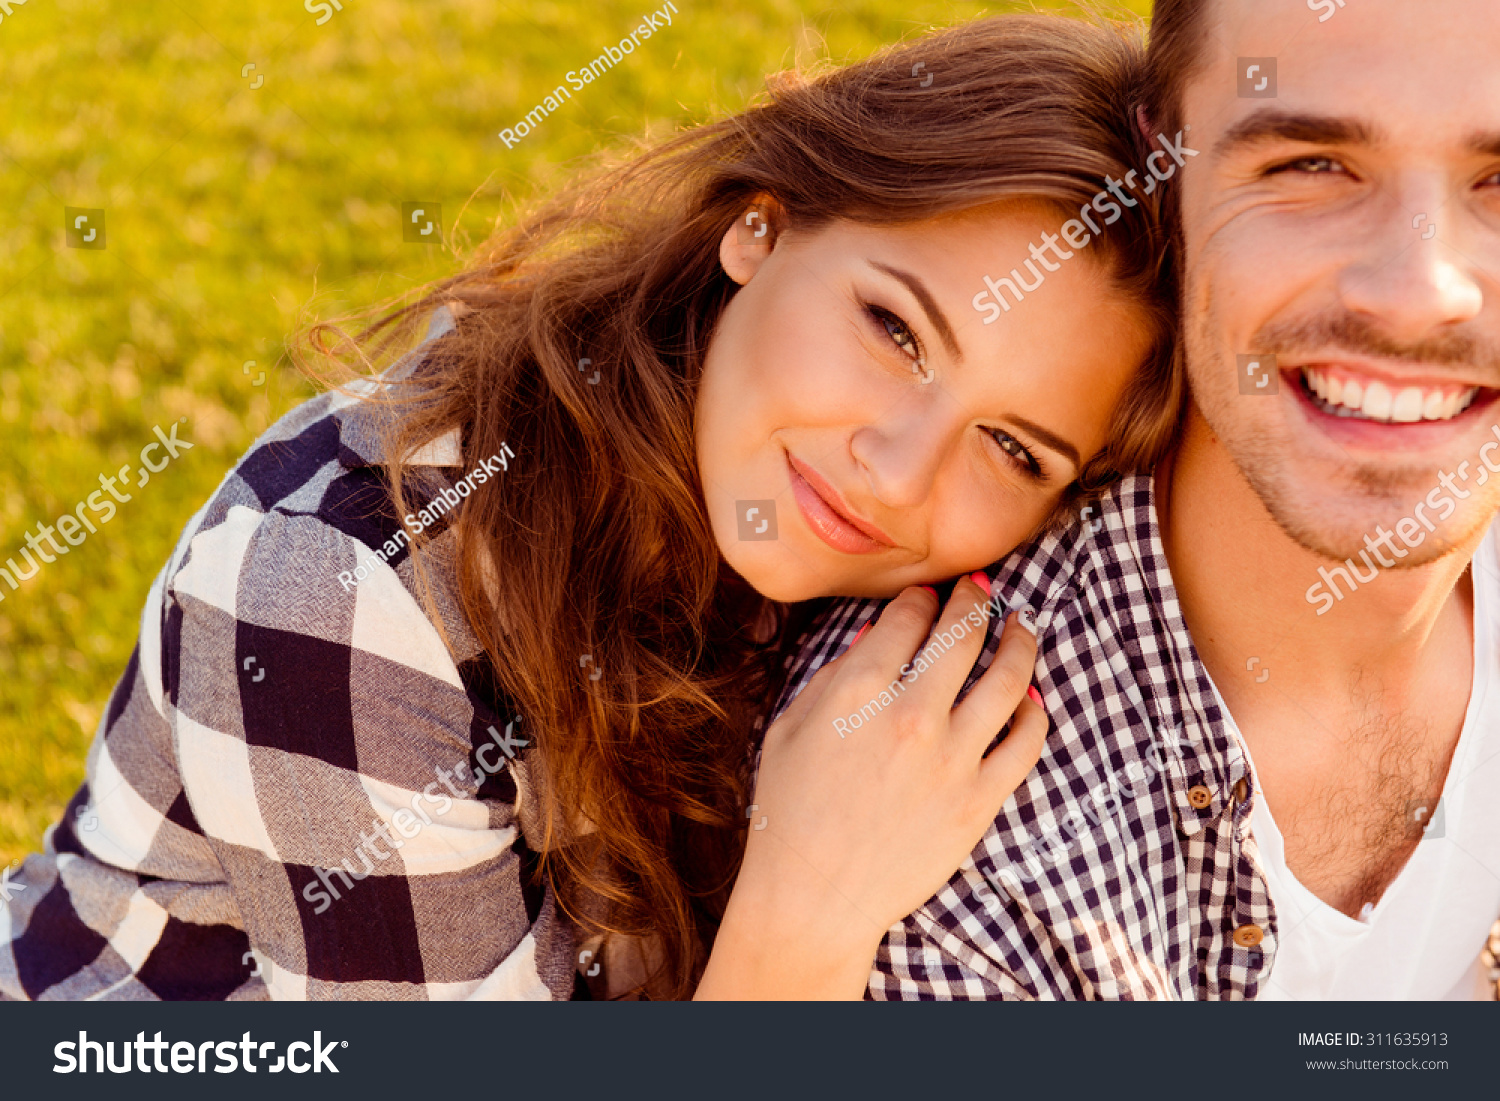 stock-photo-young-woman-put-her-head-on-the-shoulder-of-her-boyfriend-311635913.jpg